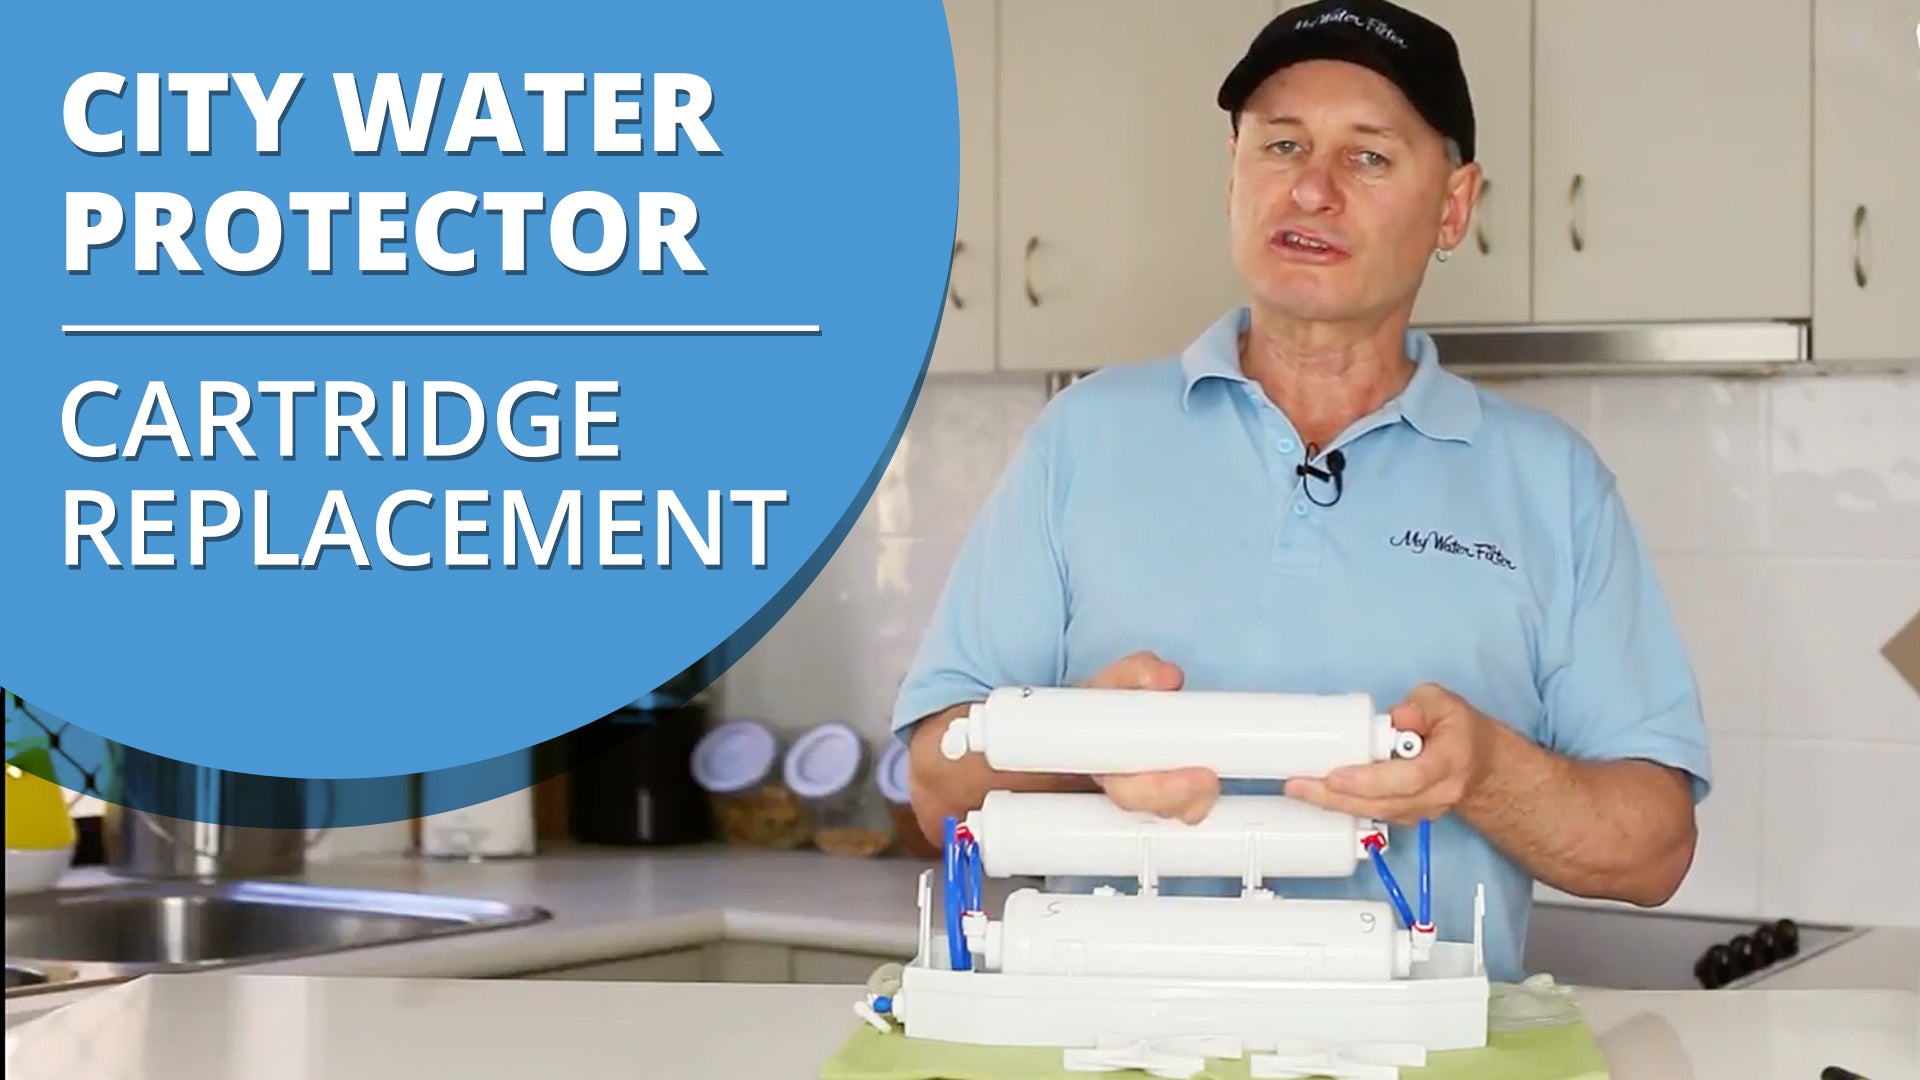 [VIDEO] How to Change the Cartridge in your City Water Protector